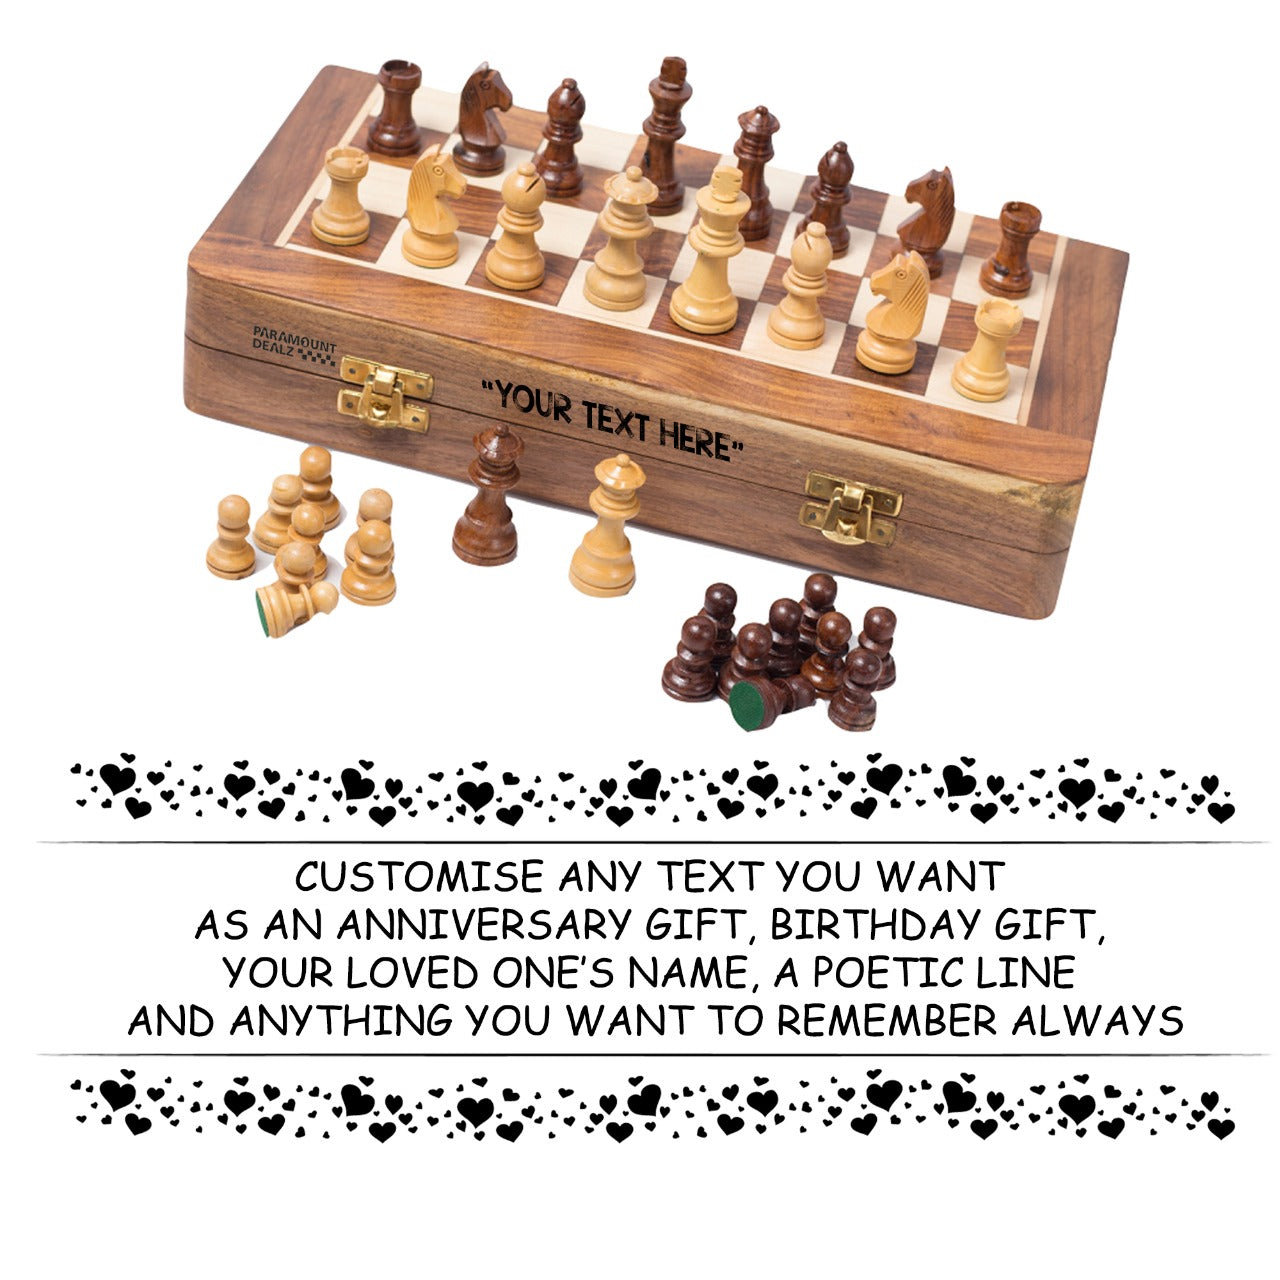 Personalized Wooden Chess Set